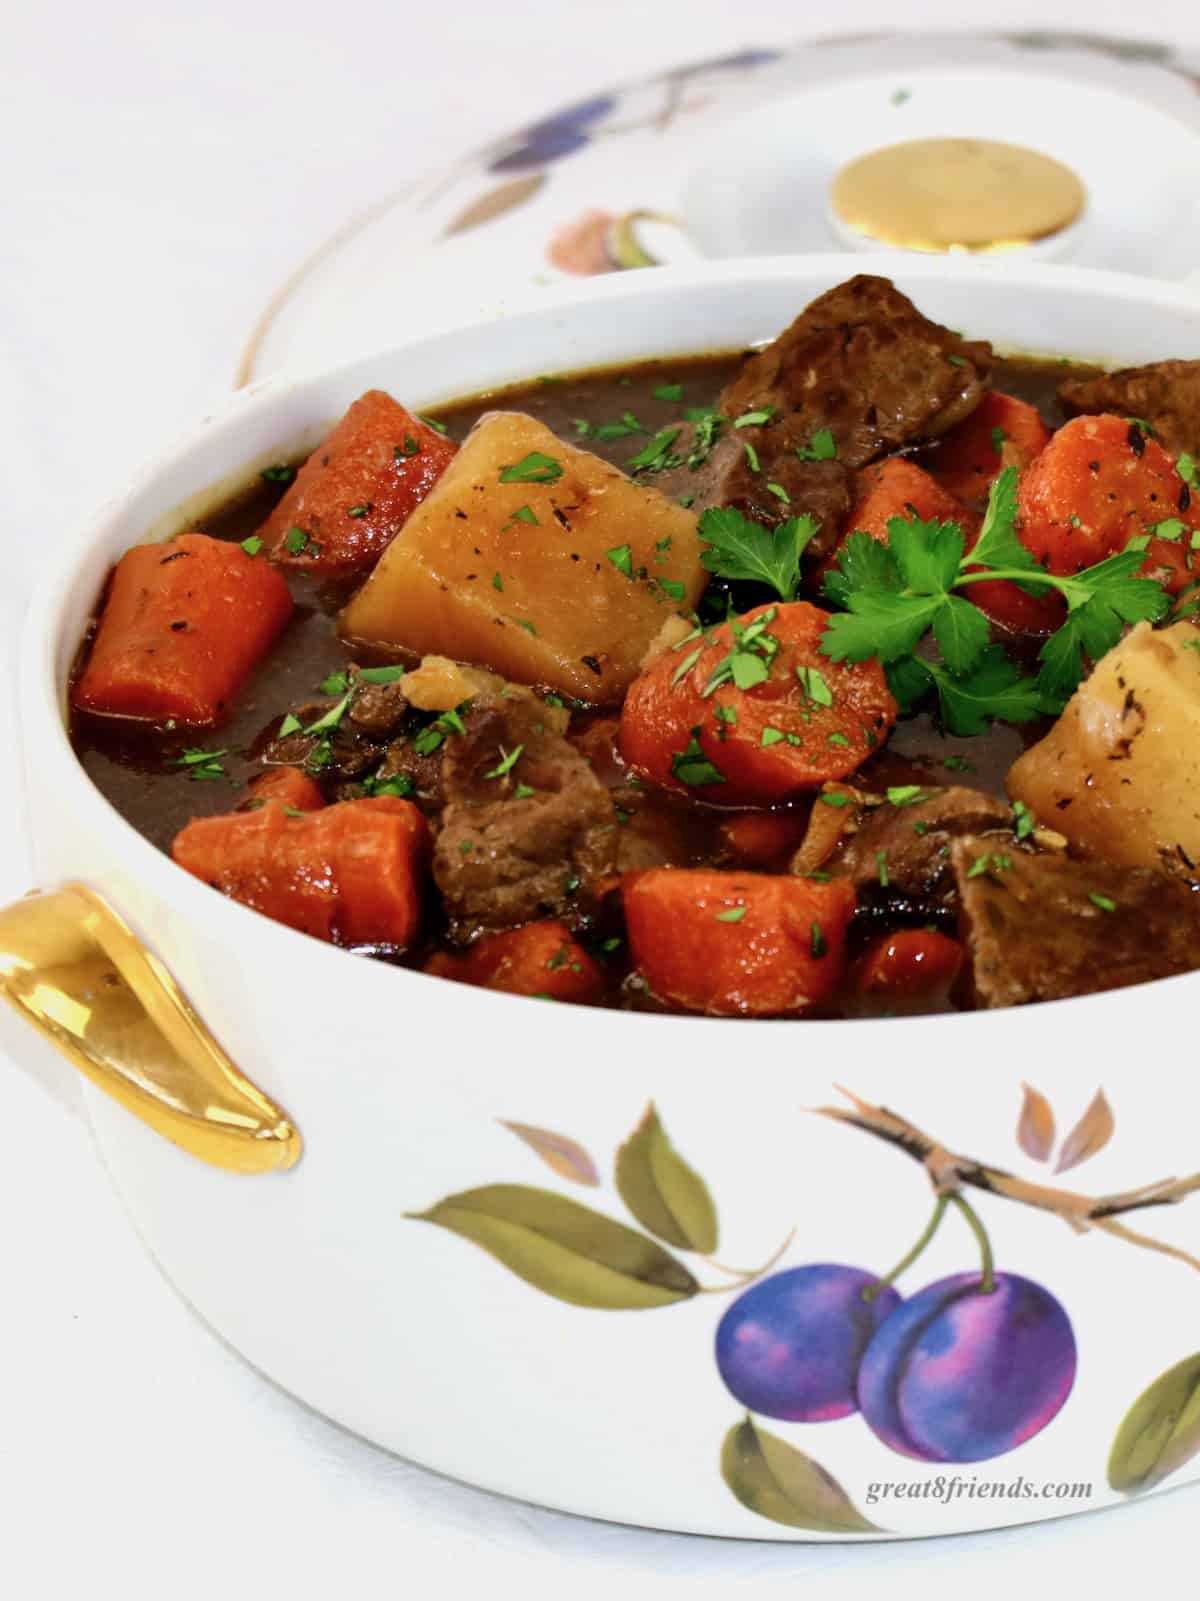 Beef stew in a ceramic casserole decorated with fruit.